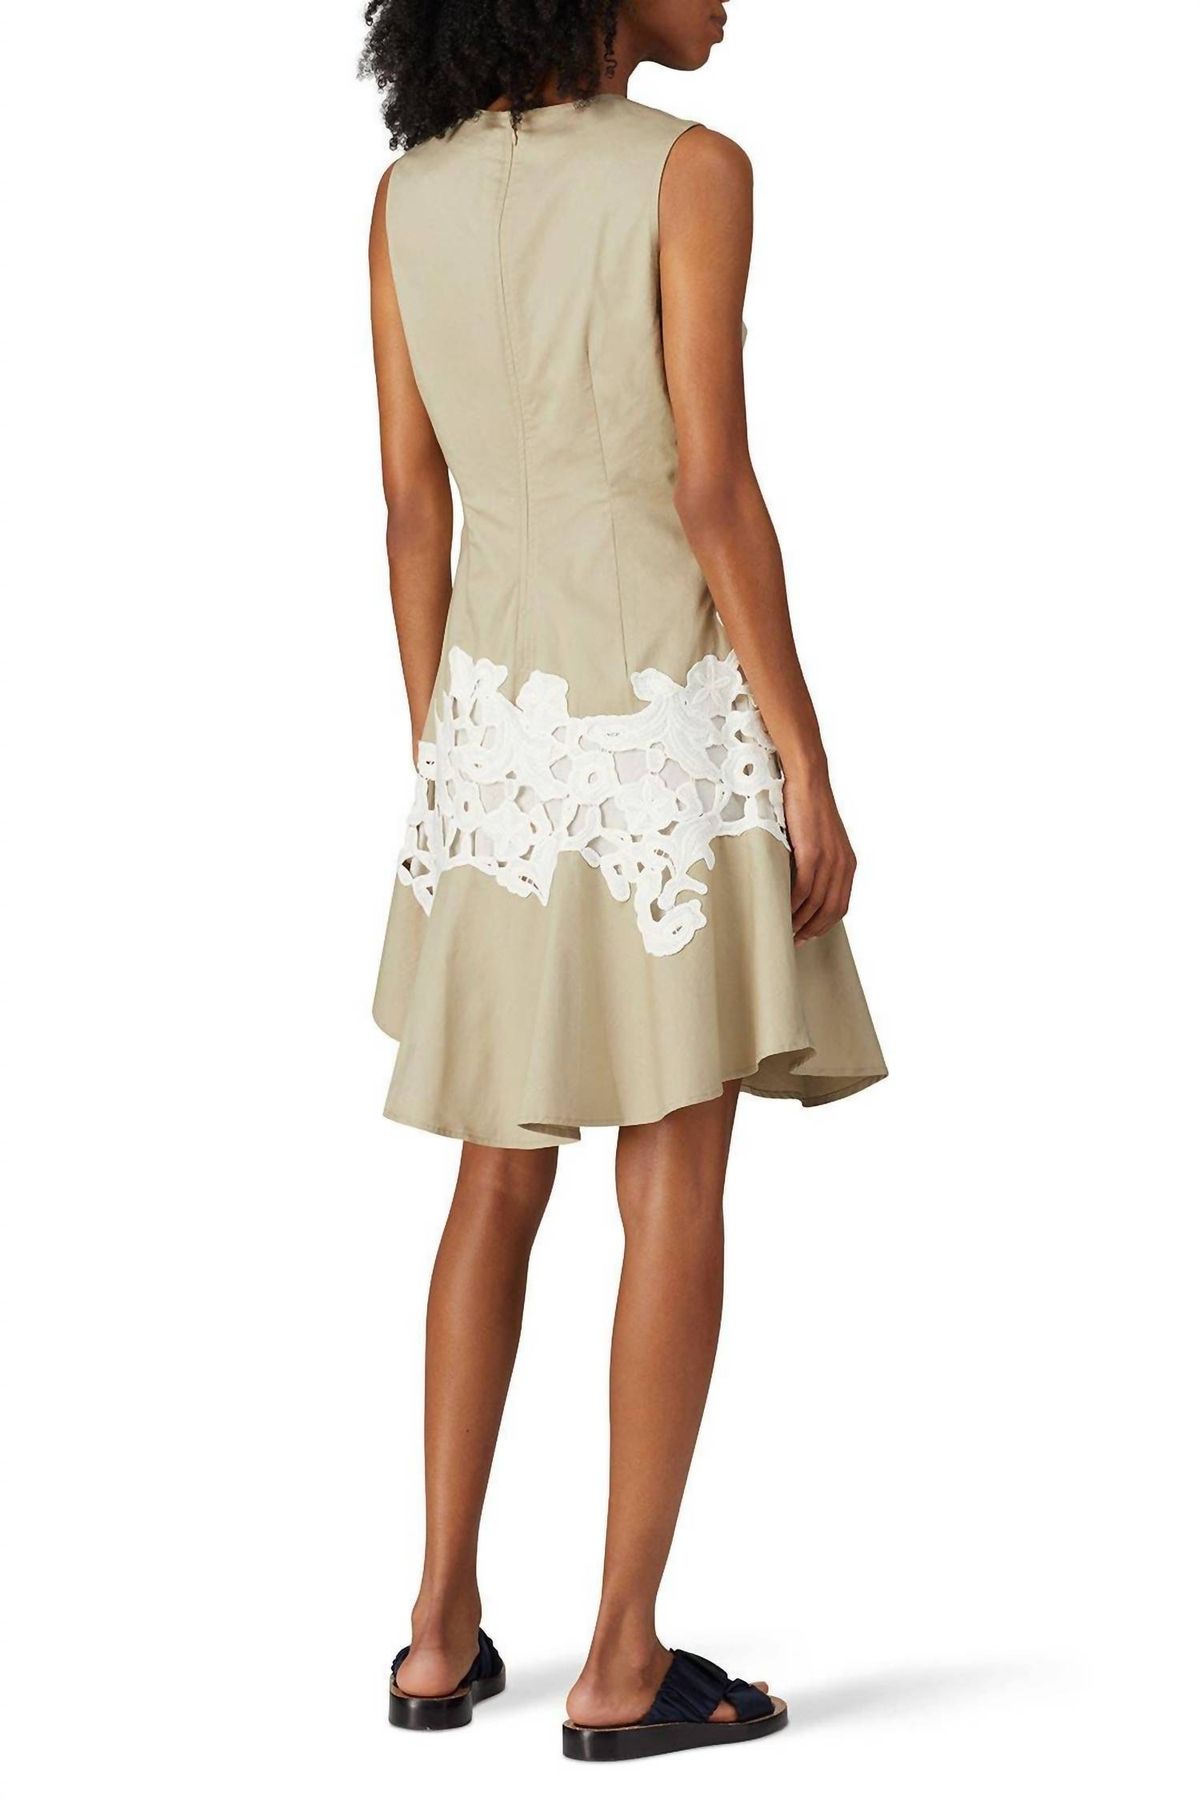 Style 1-3036452524-1696-1 Derek Lam 10 Crosby Plus Size 48 Lace Nude Cocktail Dress on Queenly